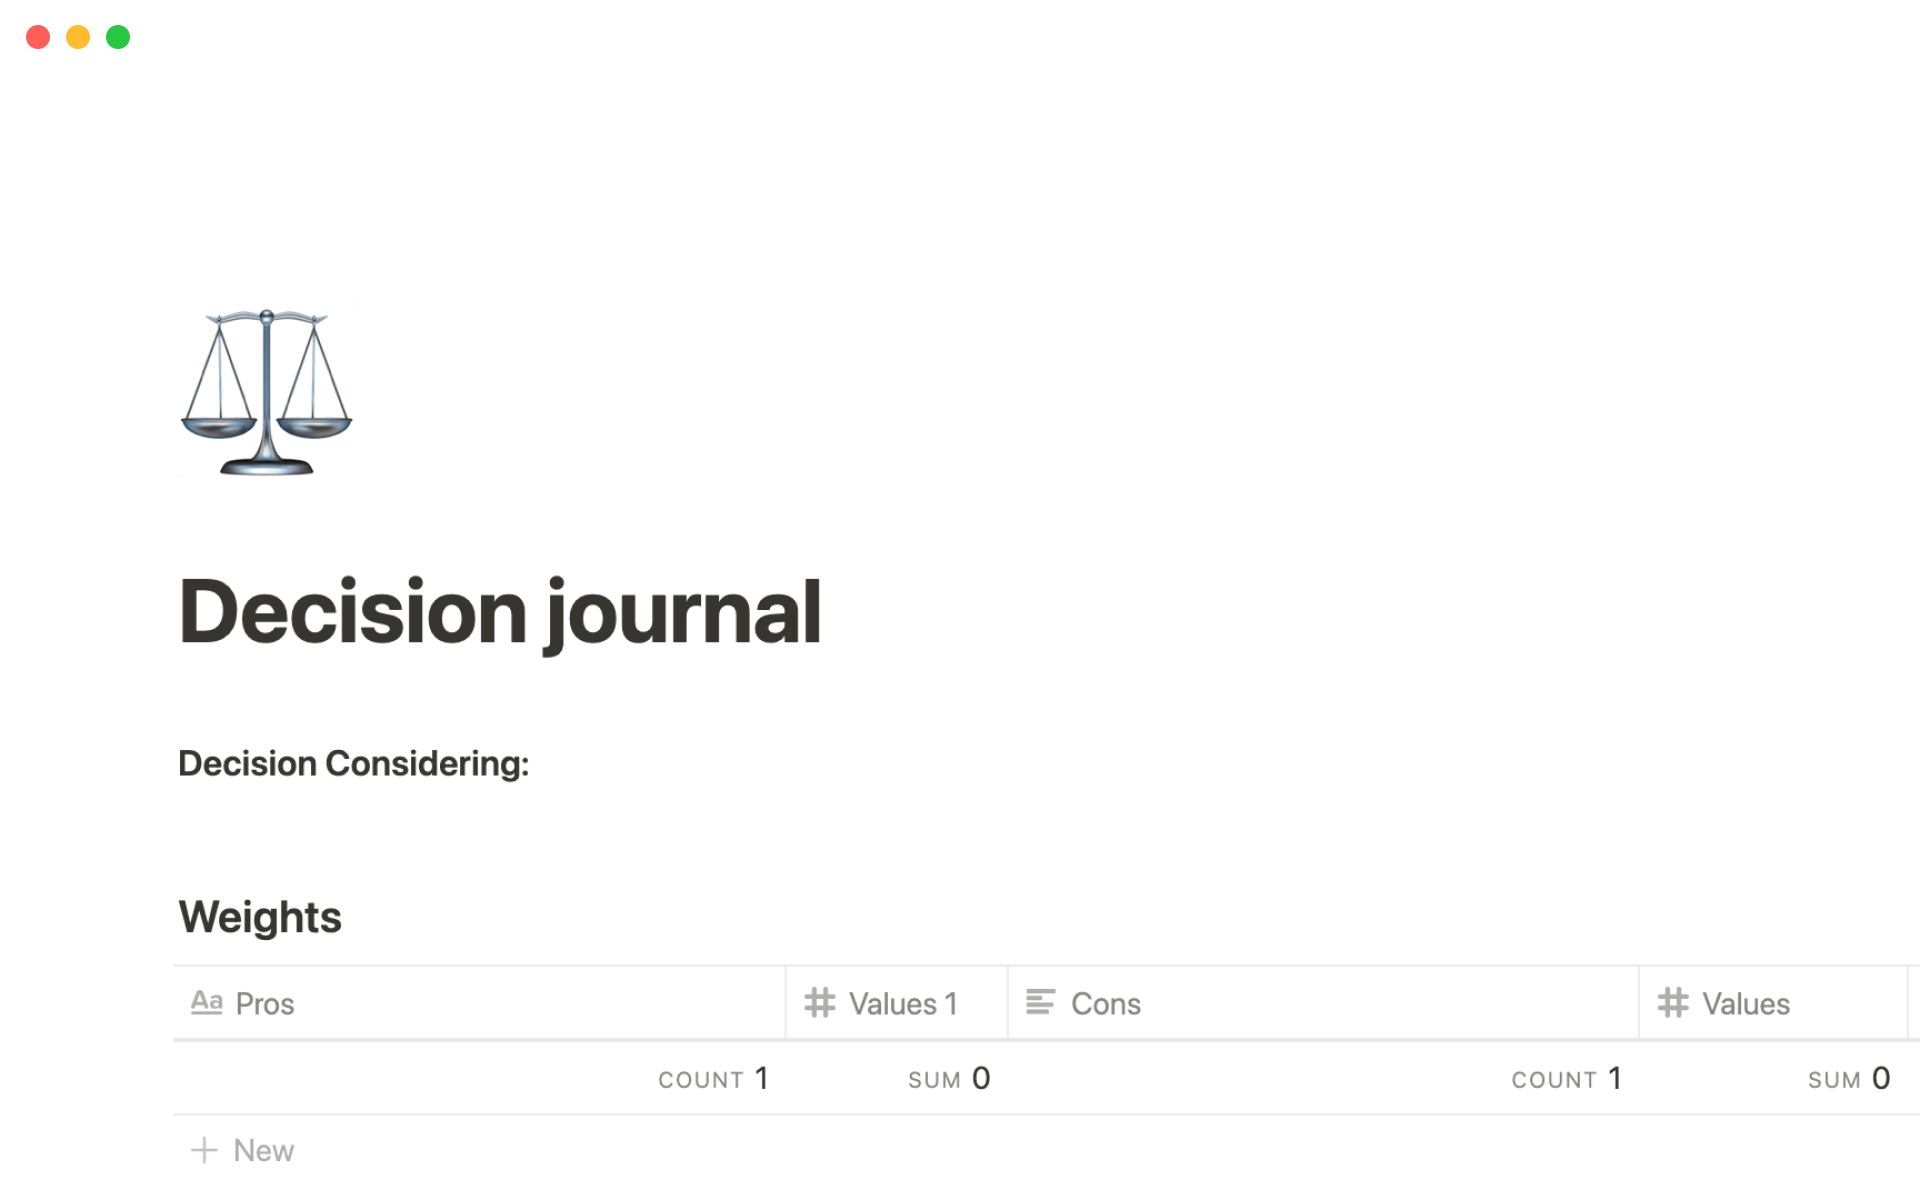 The desktop image for the Decision journal template